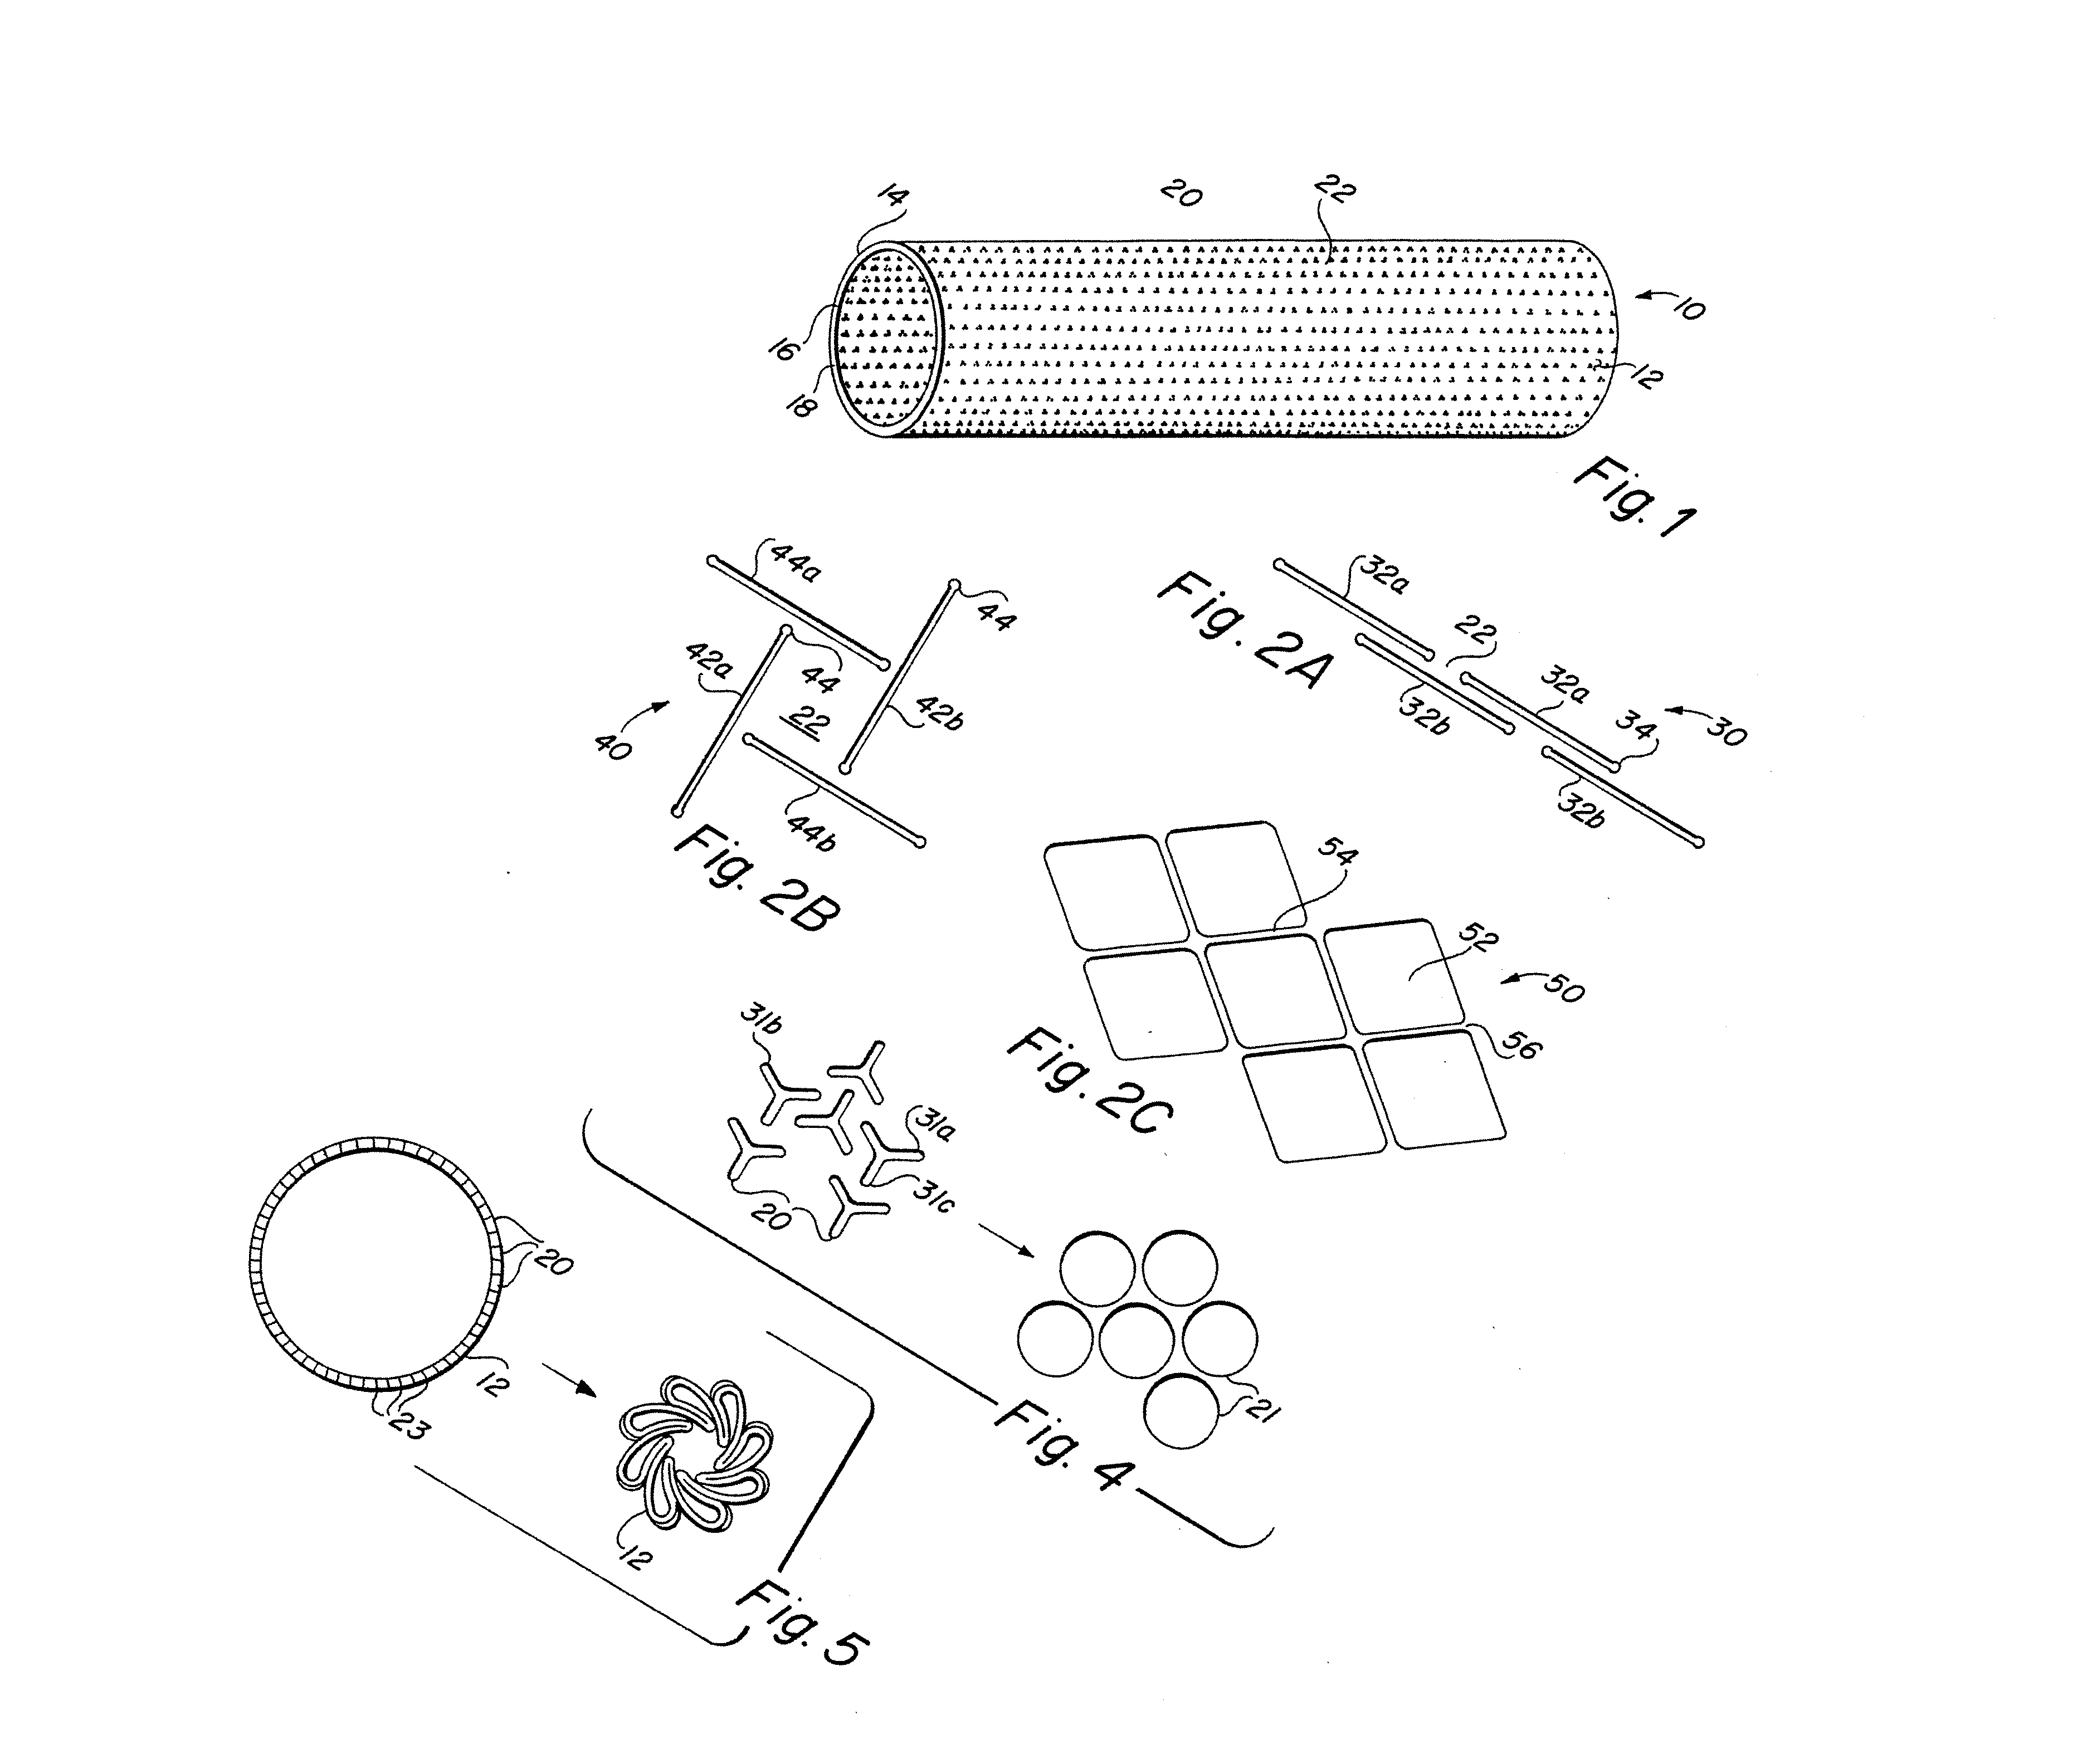 Self-supporting metallic implantable grafts, compliant implantable medical devices and methods of making same